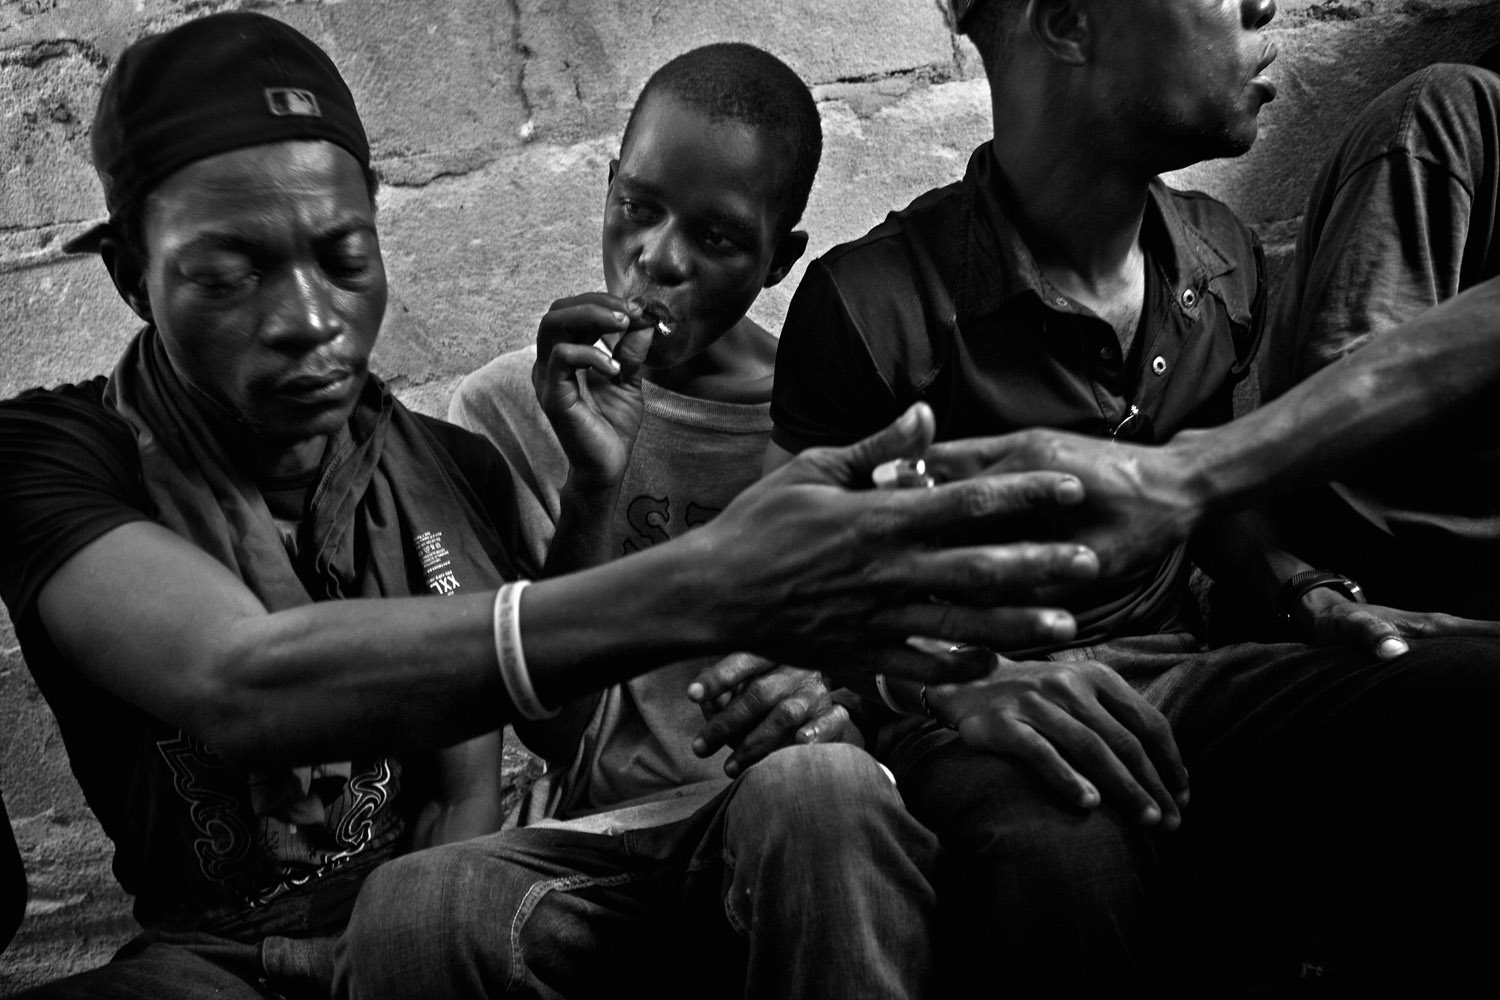 Former child soldiers smoke marijuana laced with heroin at the informal settlement known as Trench Town. Thousands of Liberia’s children were conscripted to fight in the country’s bloody civil wars between 1989 and 2003. Monrovia, Liberia. January 2013.